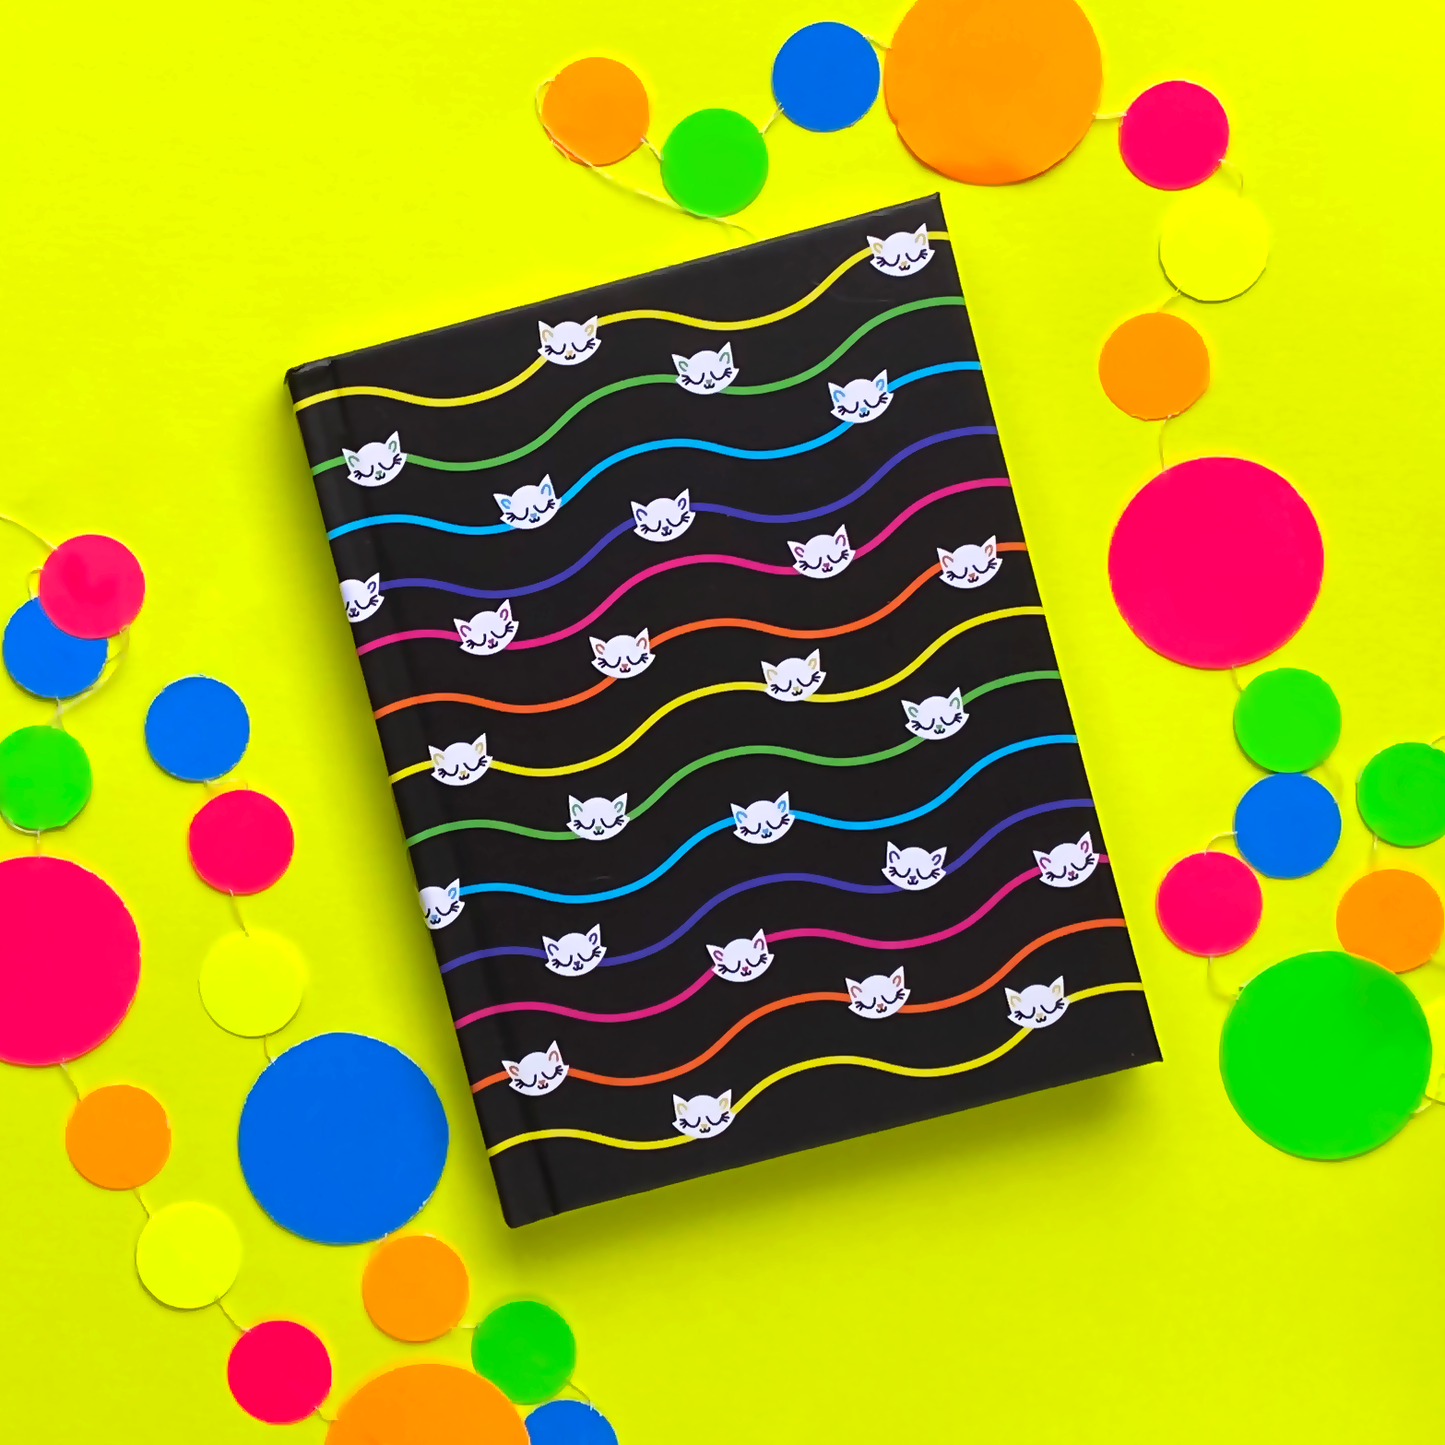 Black journal with wavy rainbow pinstripes and white cats